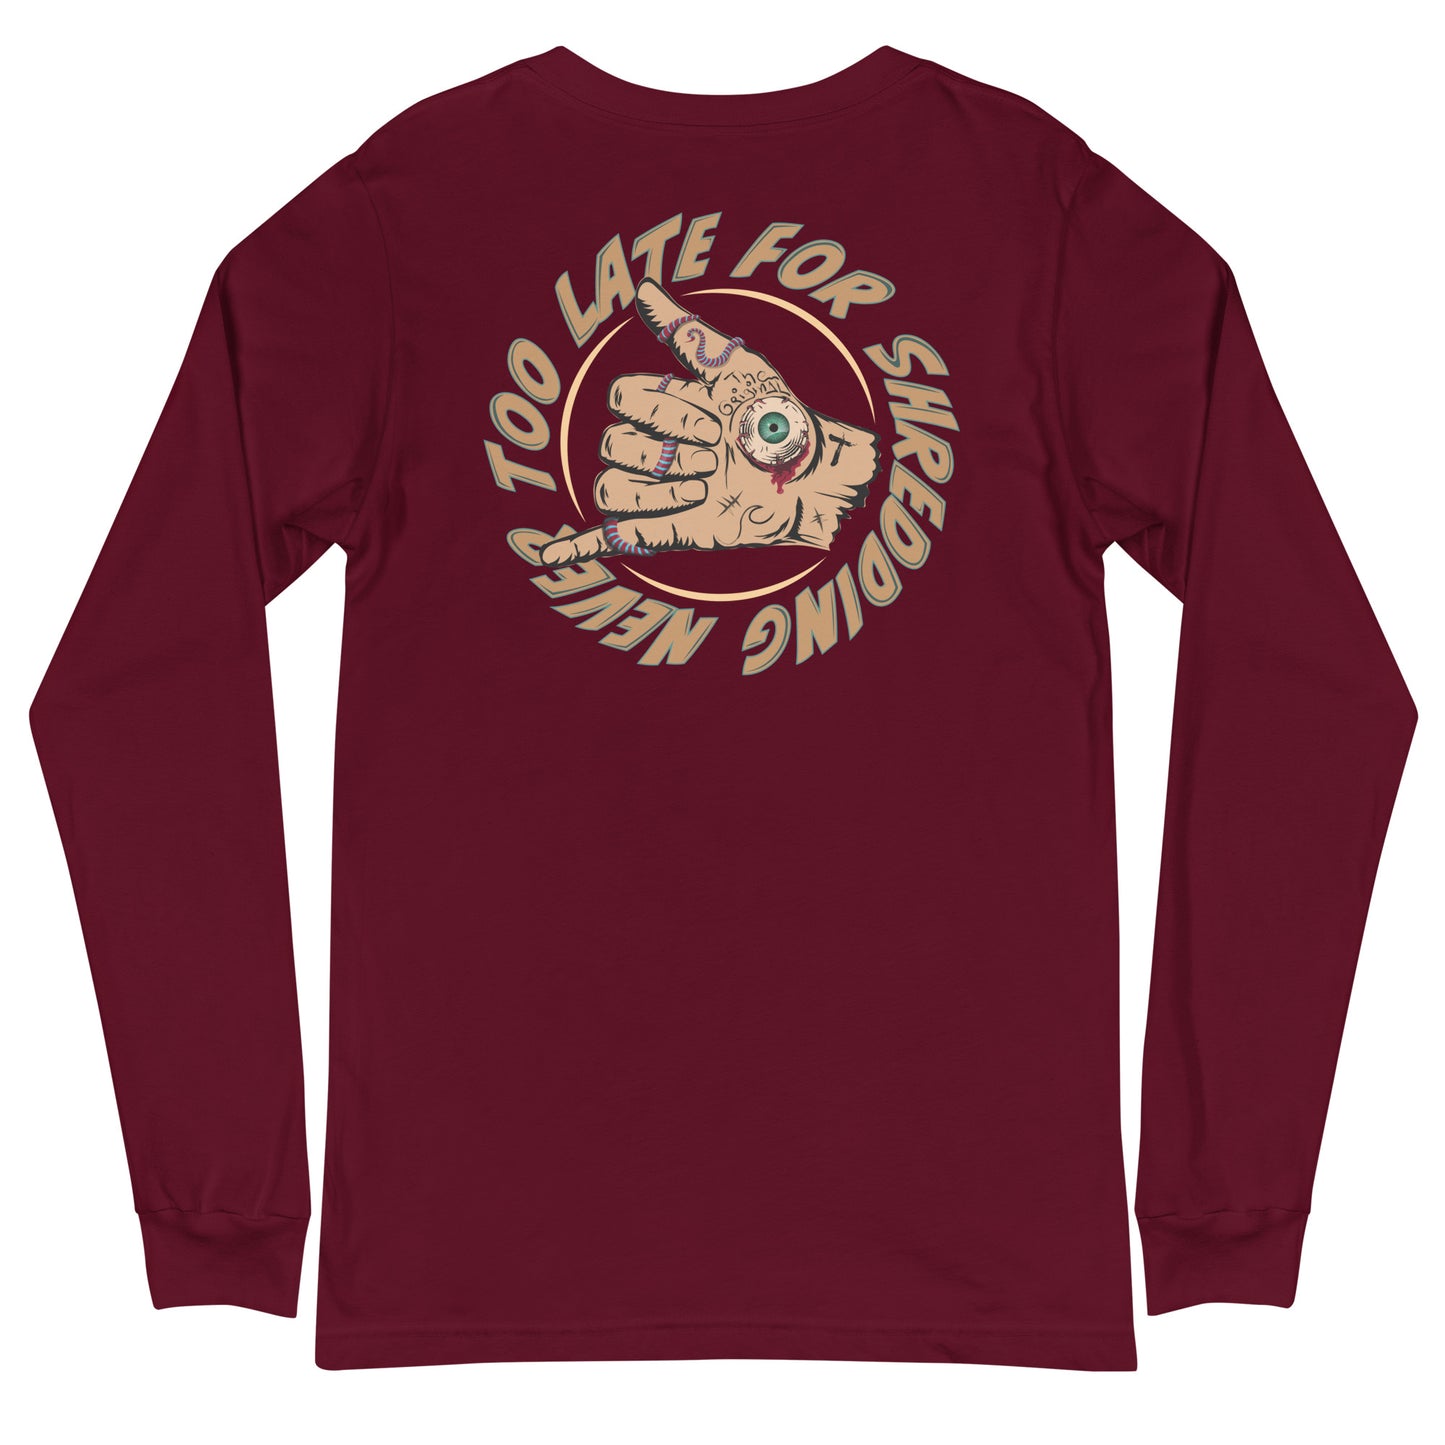 Long Sleeve surfing shaka hand Never Too Late style volcom, dos unisex couleur bordeaux